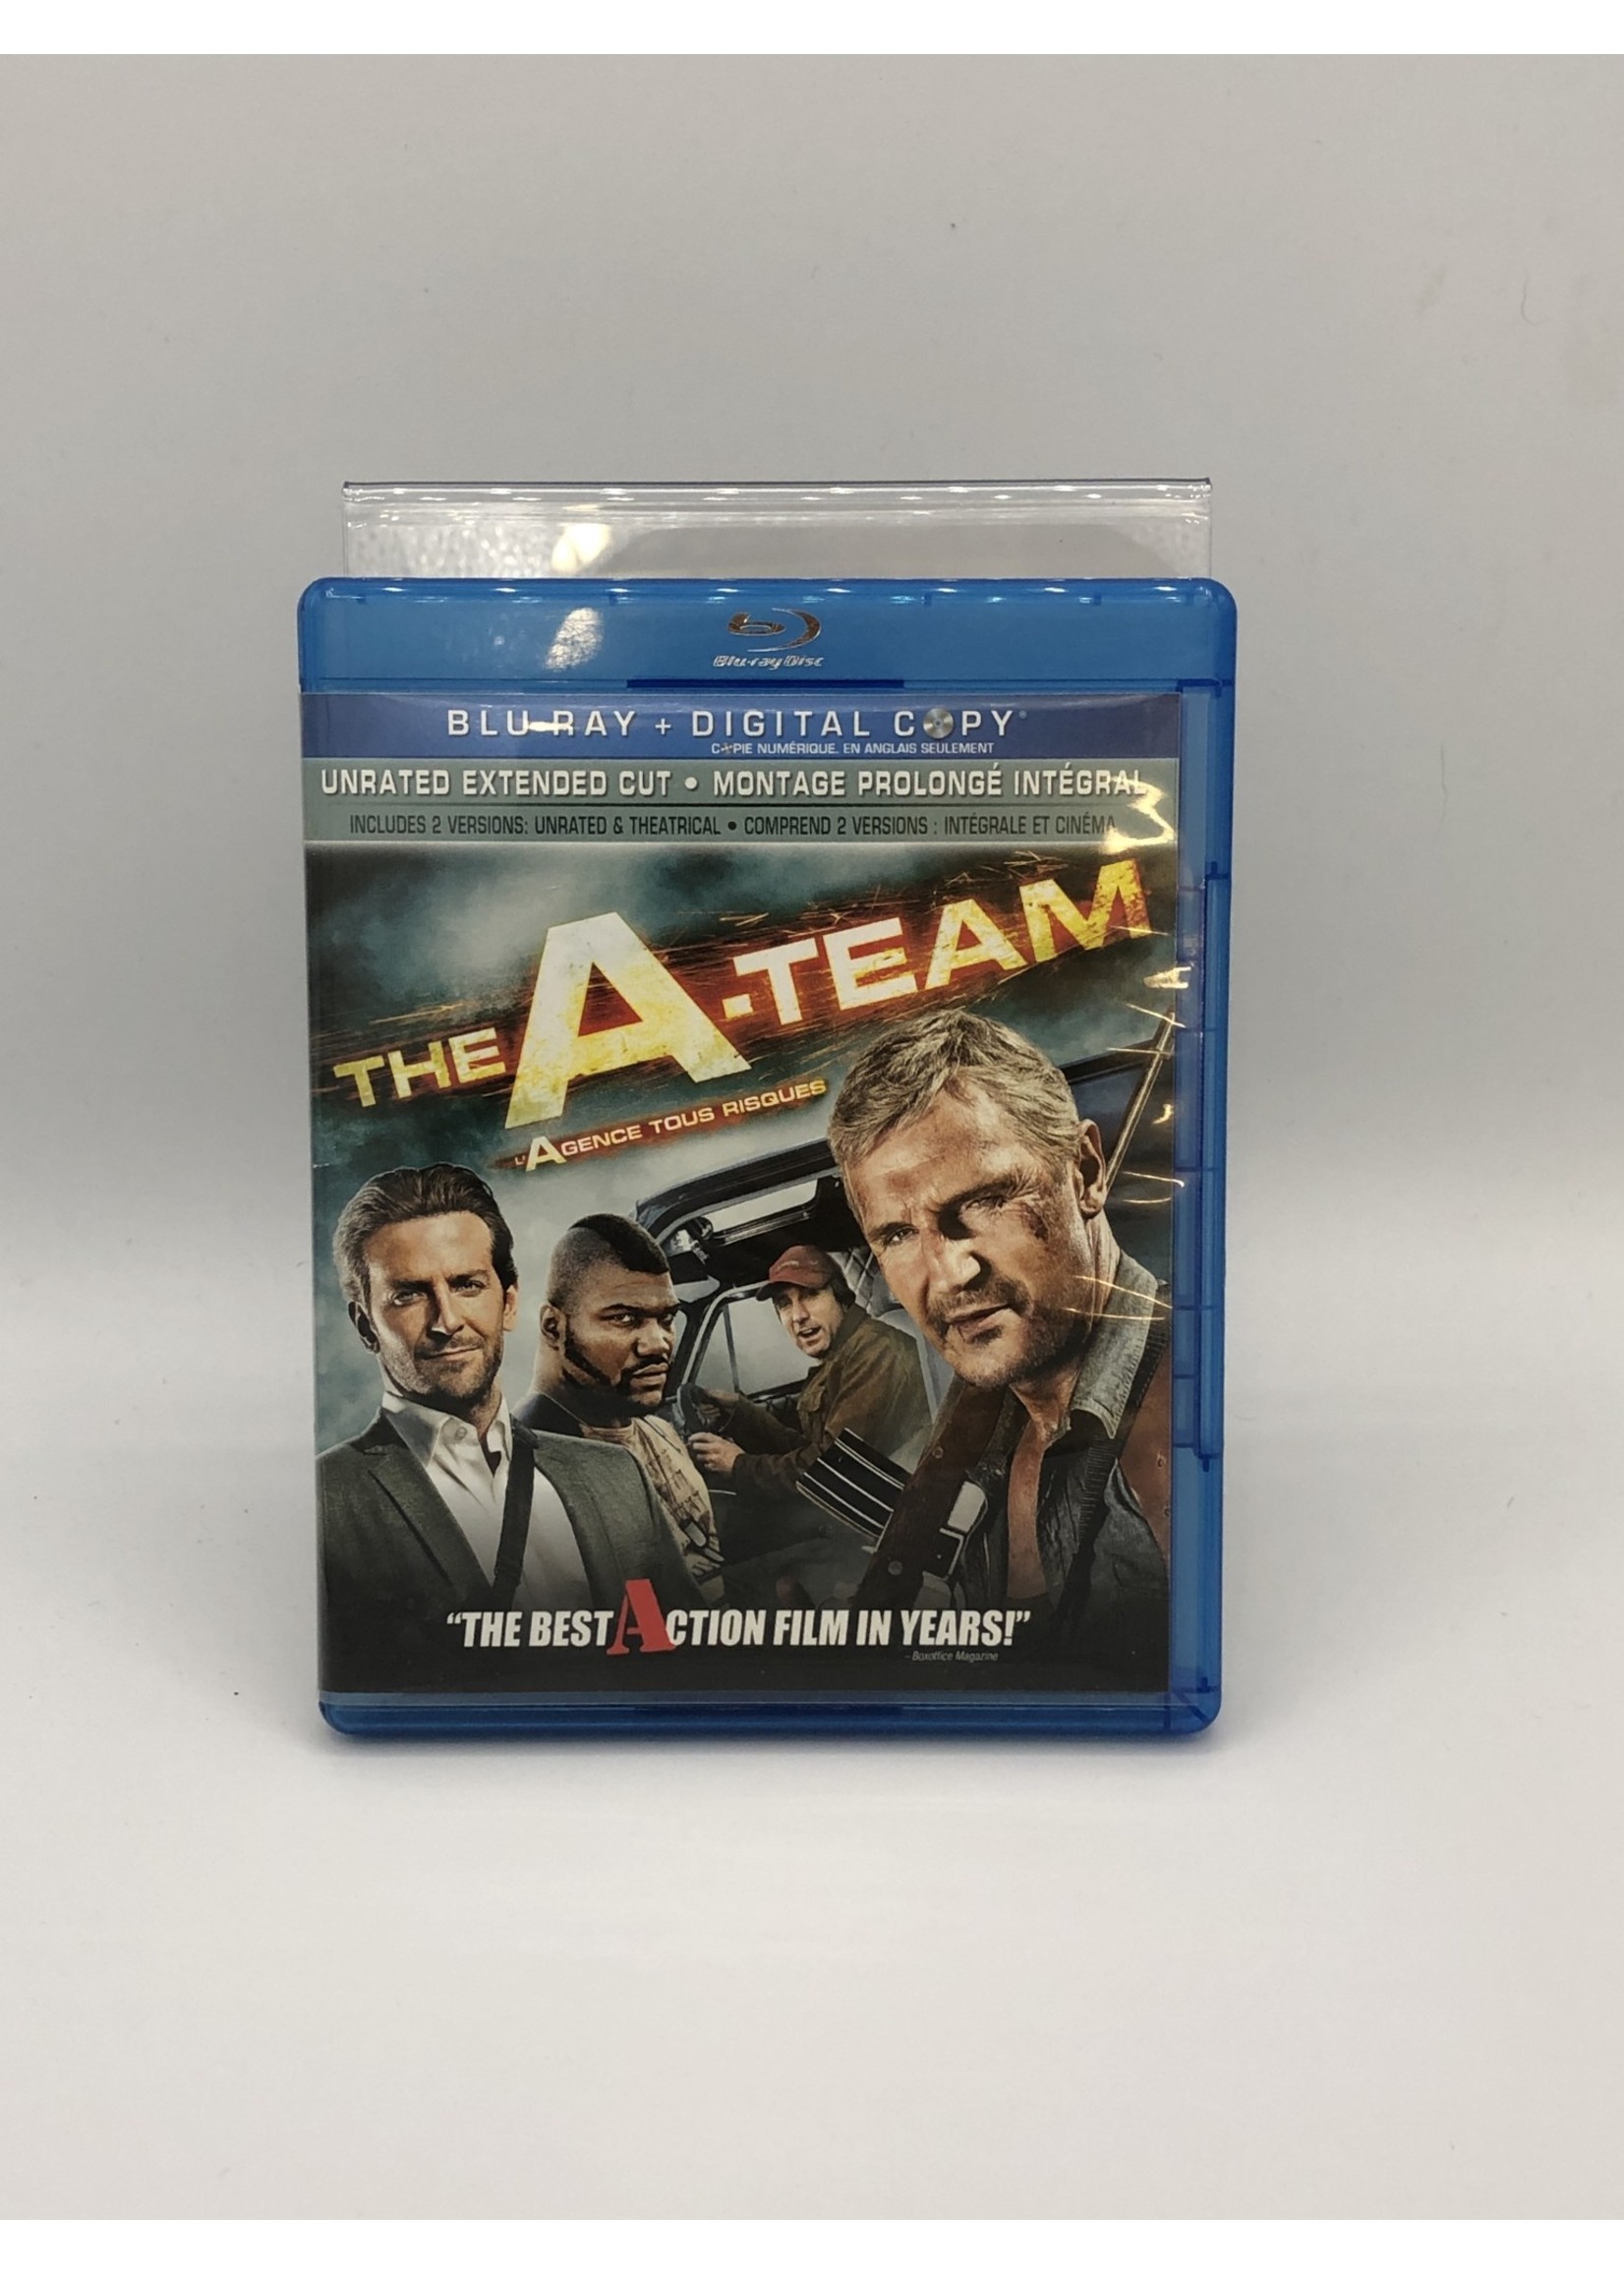 Bluray The A-Team Unrated Extended Cut Bluray + DVD